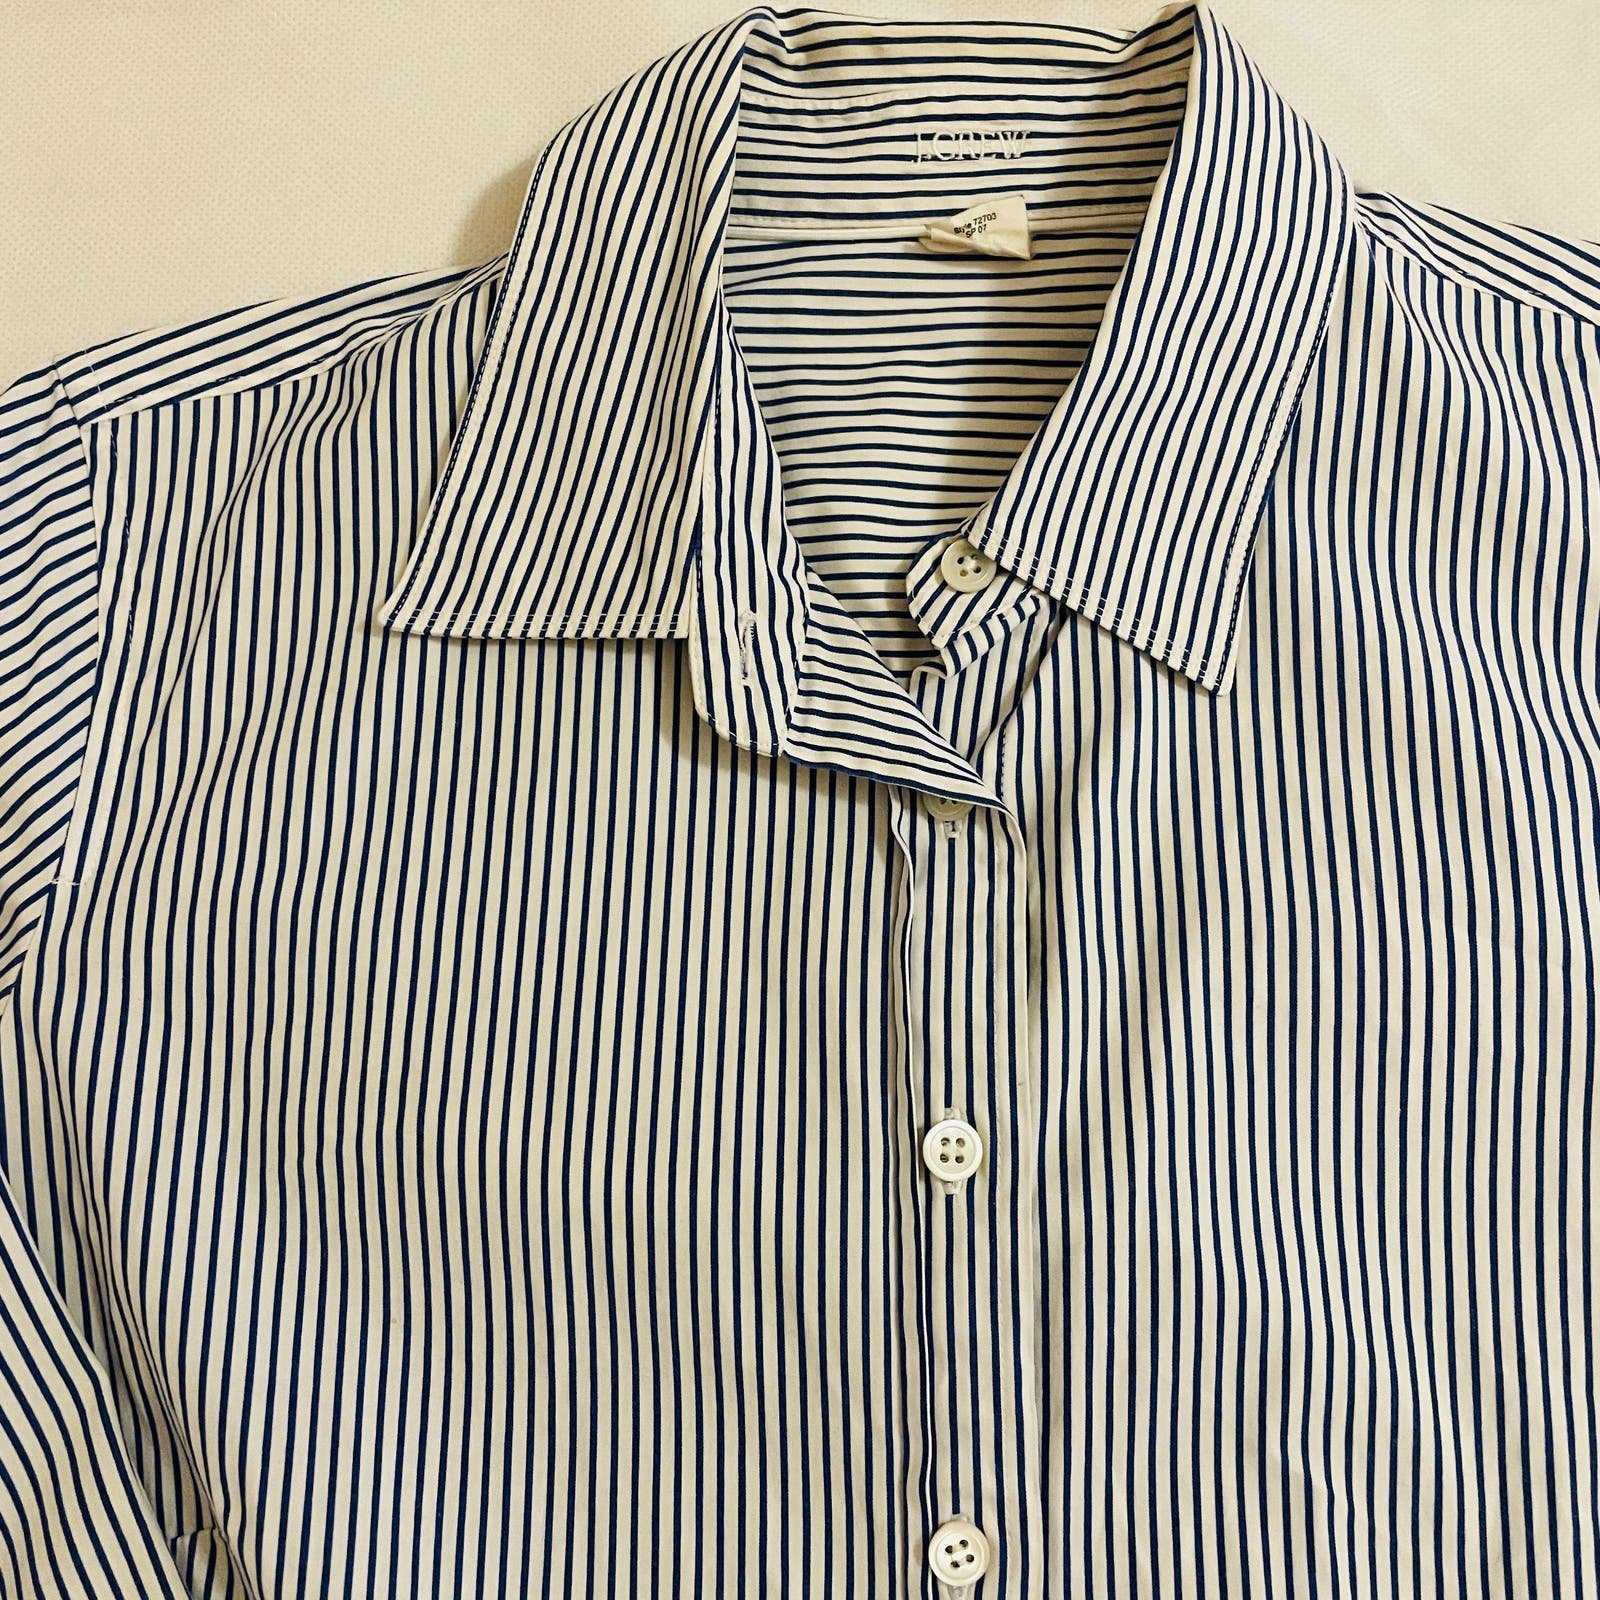 save up to 70% J. Crew Womens Button Down Shirt Stretch Striped Blue,White Large g91JEkccS Great